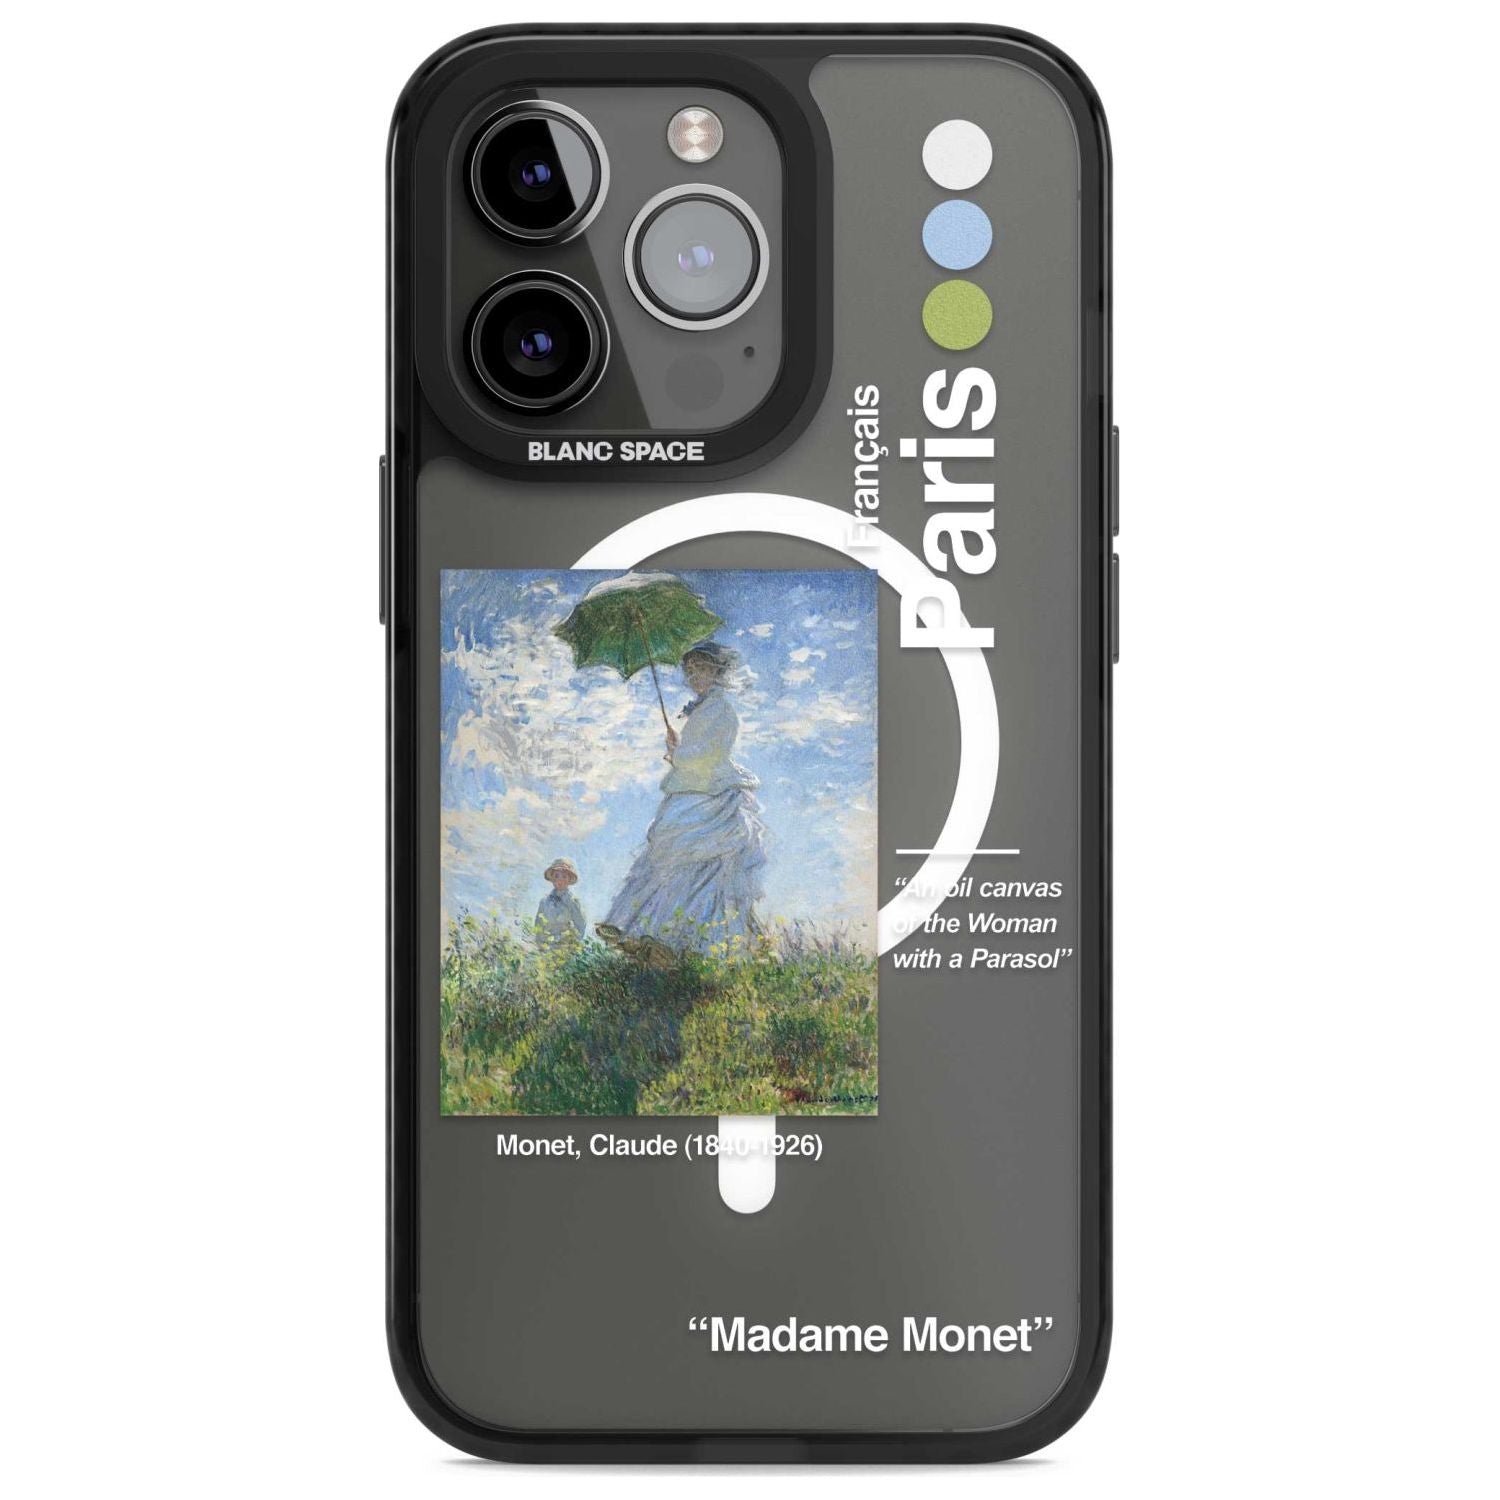 Madame Monet and Her Son Phone Case iPhone 15 Pro Max / Magsafe Black Impact Case,iPhone 15 Pro / Magsafe Black Impact Case,iPhone 14 Pro Max / Magsafe Black Impact Case,iPhone 14 Pro / Magsafe Black Impact Case,iPhone 13 Pro / Magsafe Black Impact Case Blan